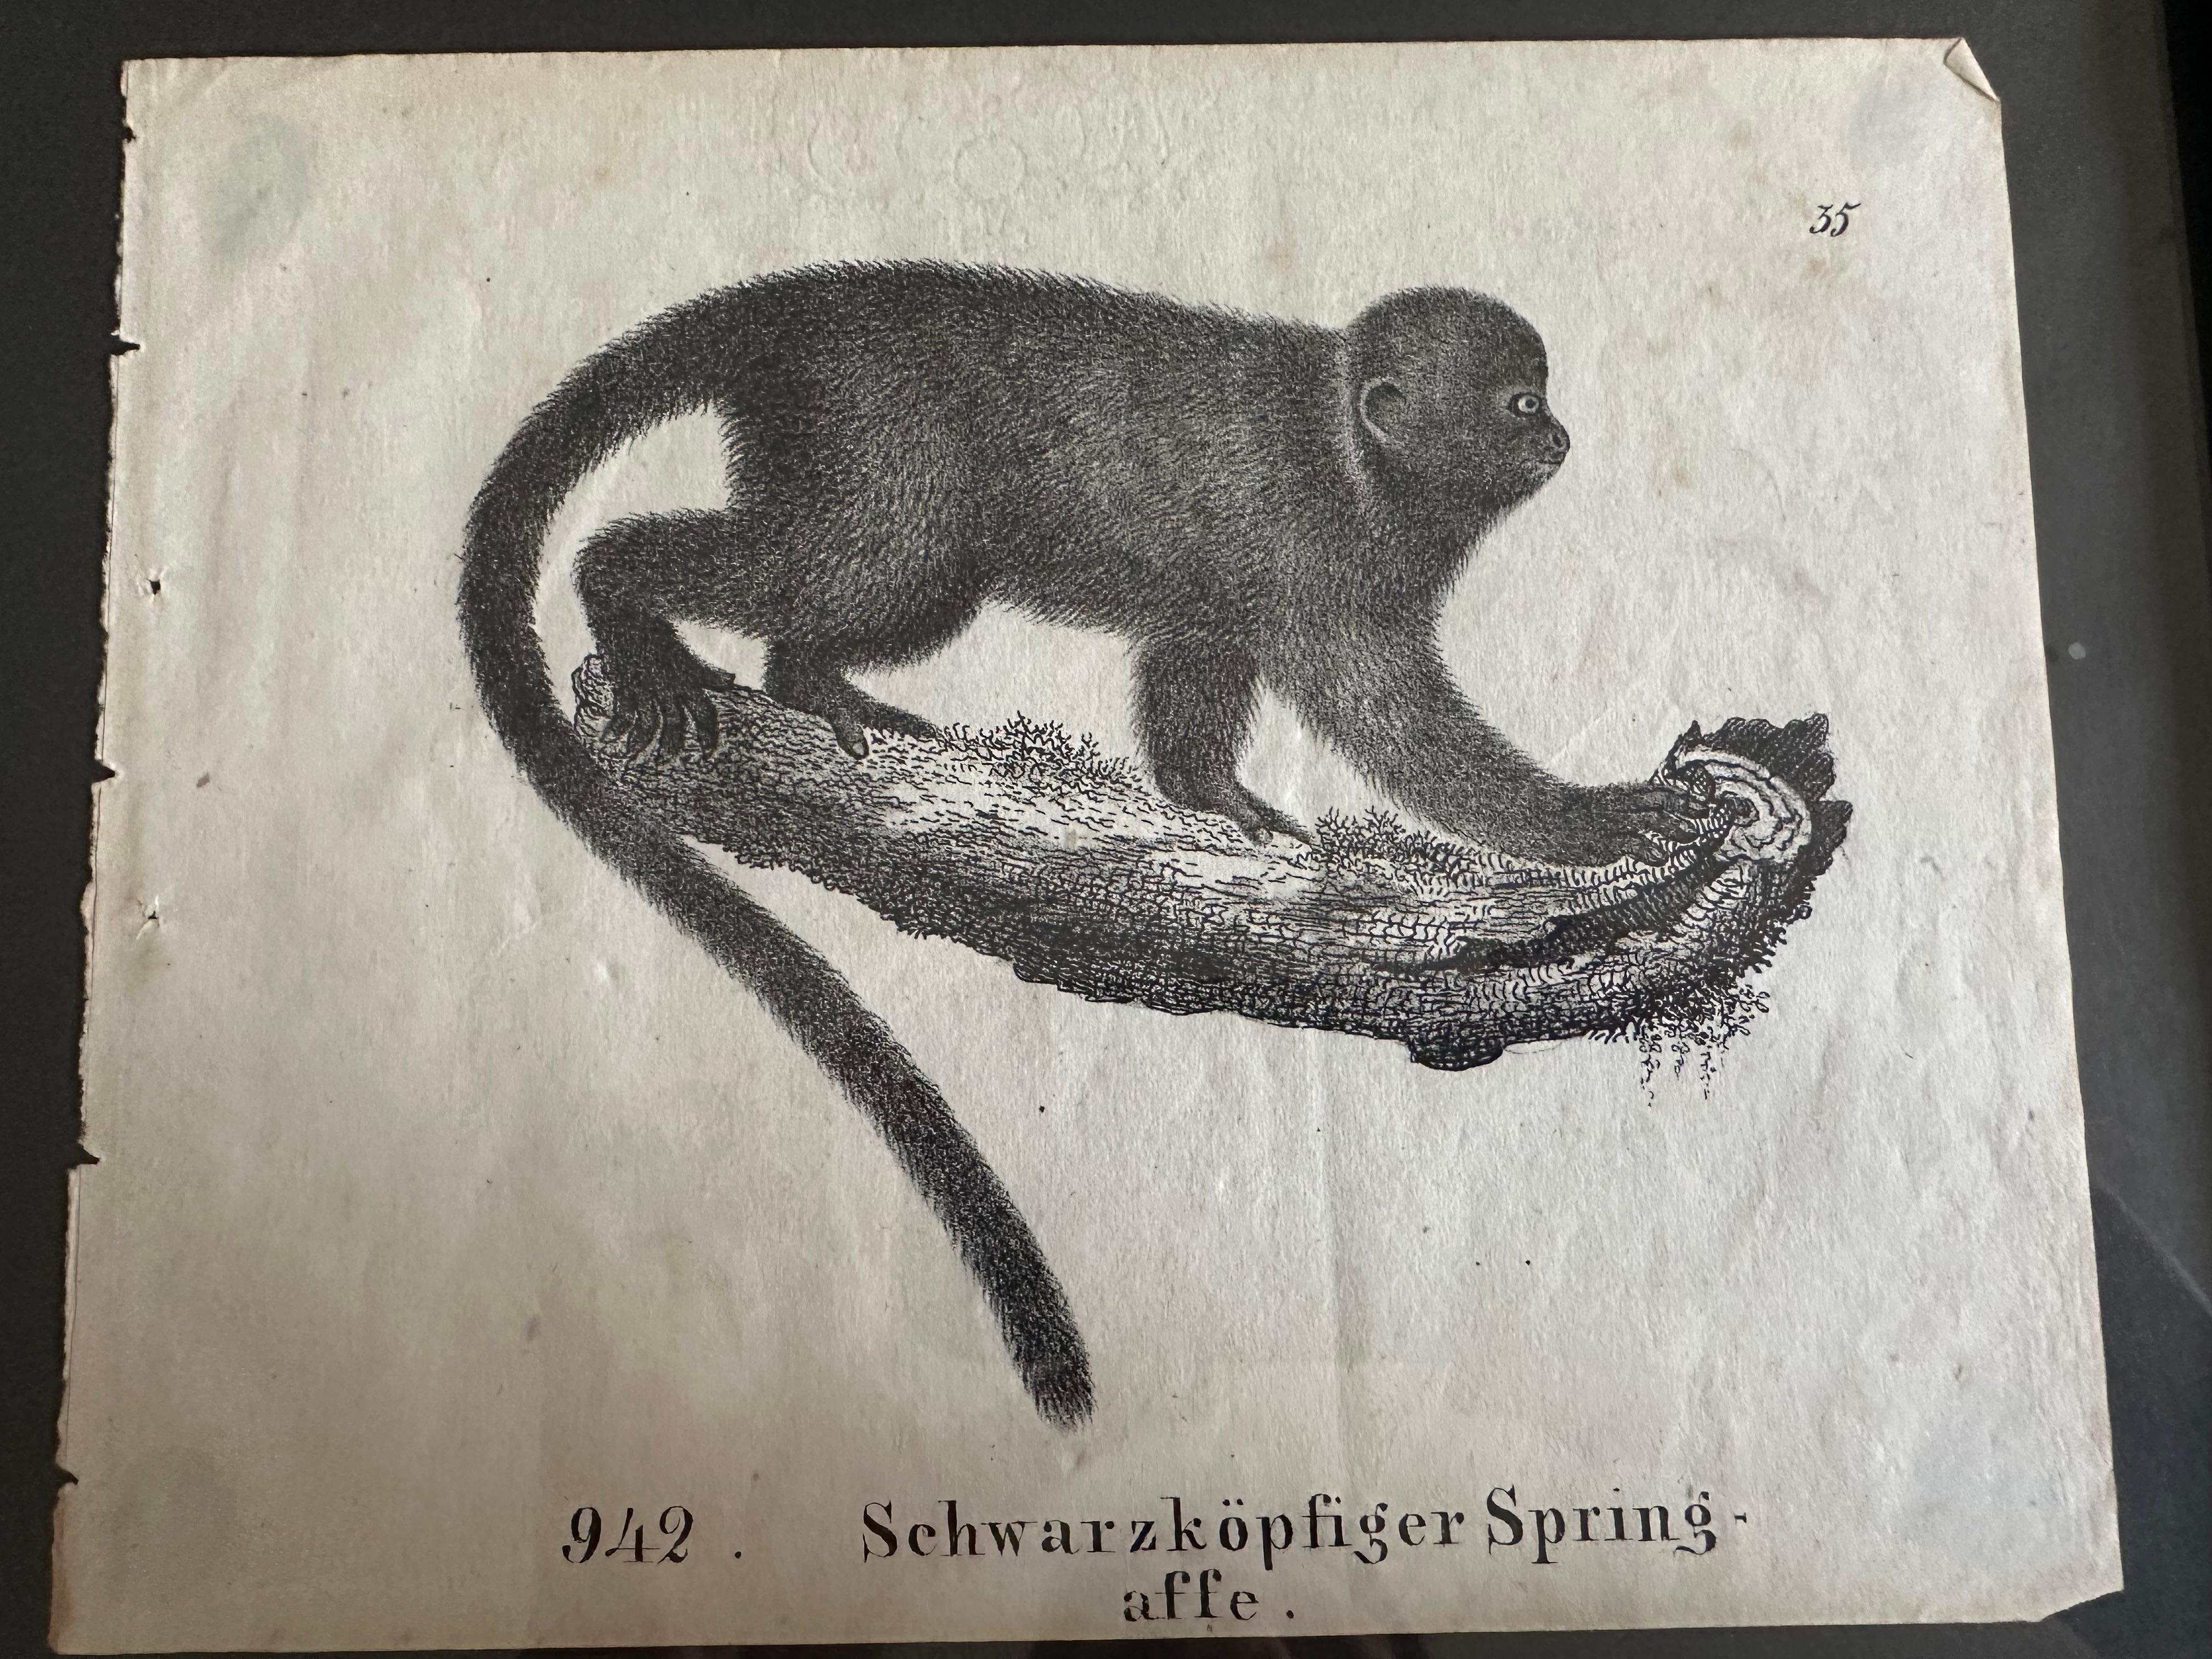 Zoological Original Lithograph Featuring a Monkey from 1831-35 For Sale 5